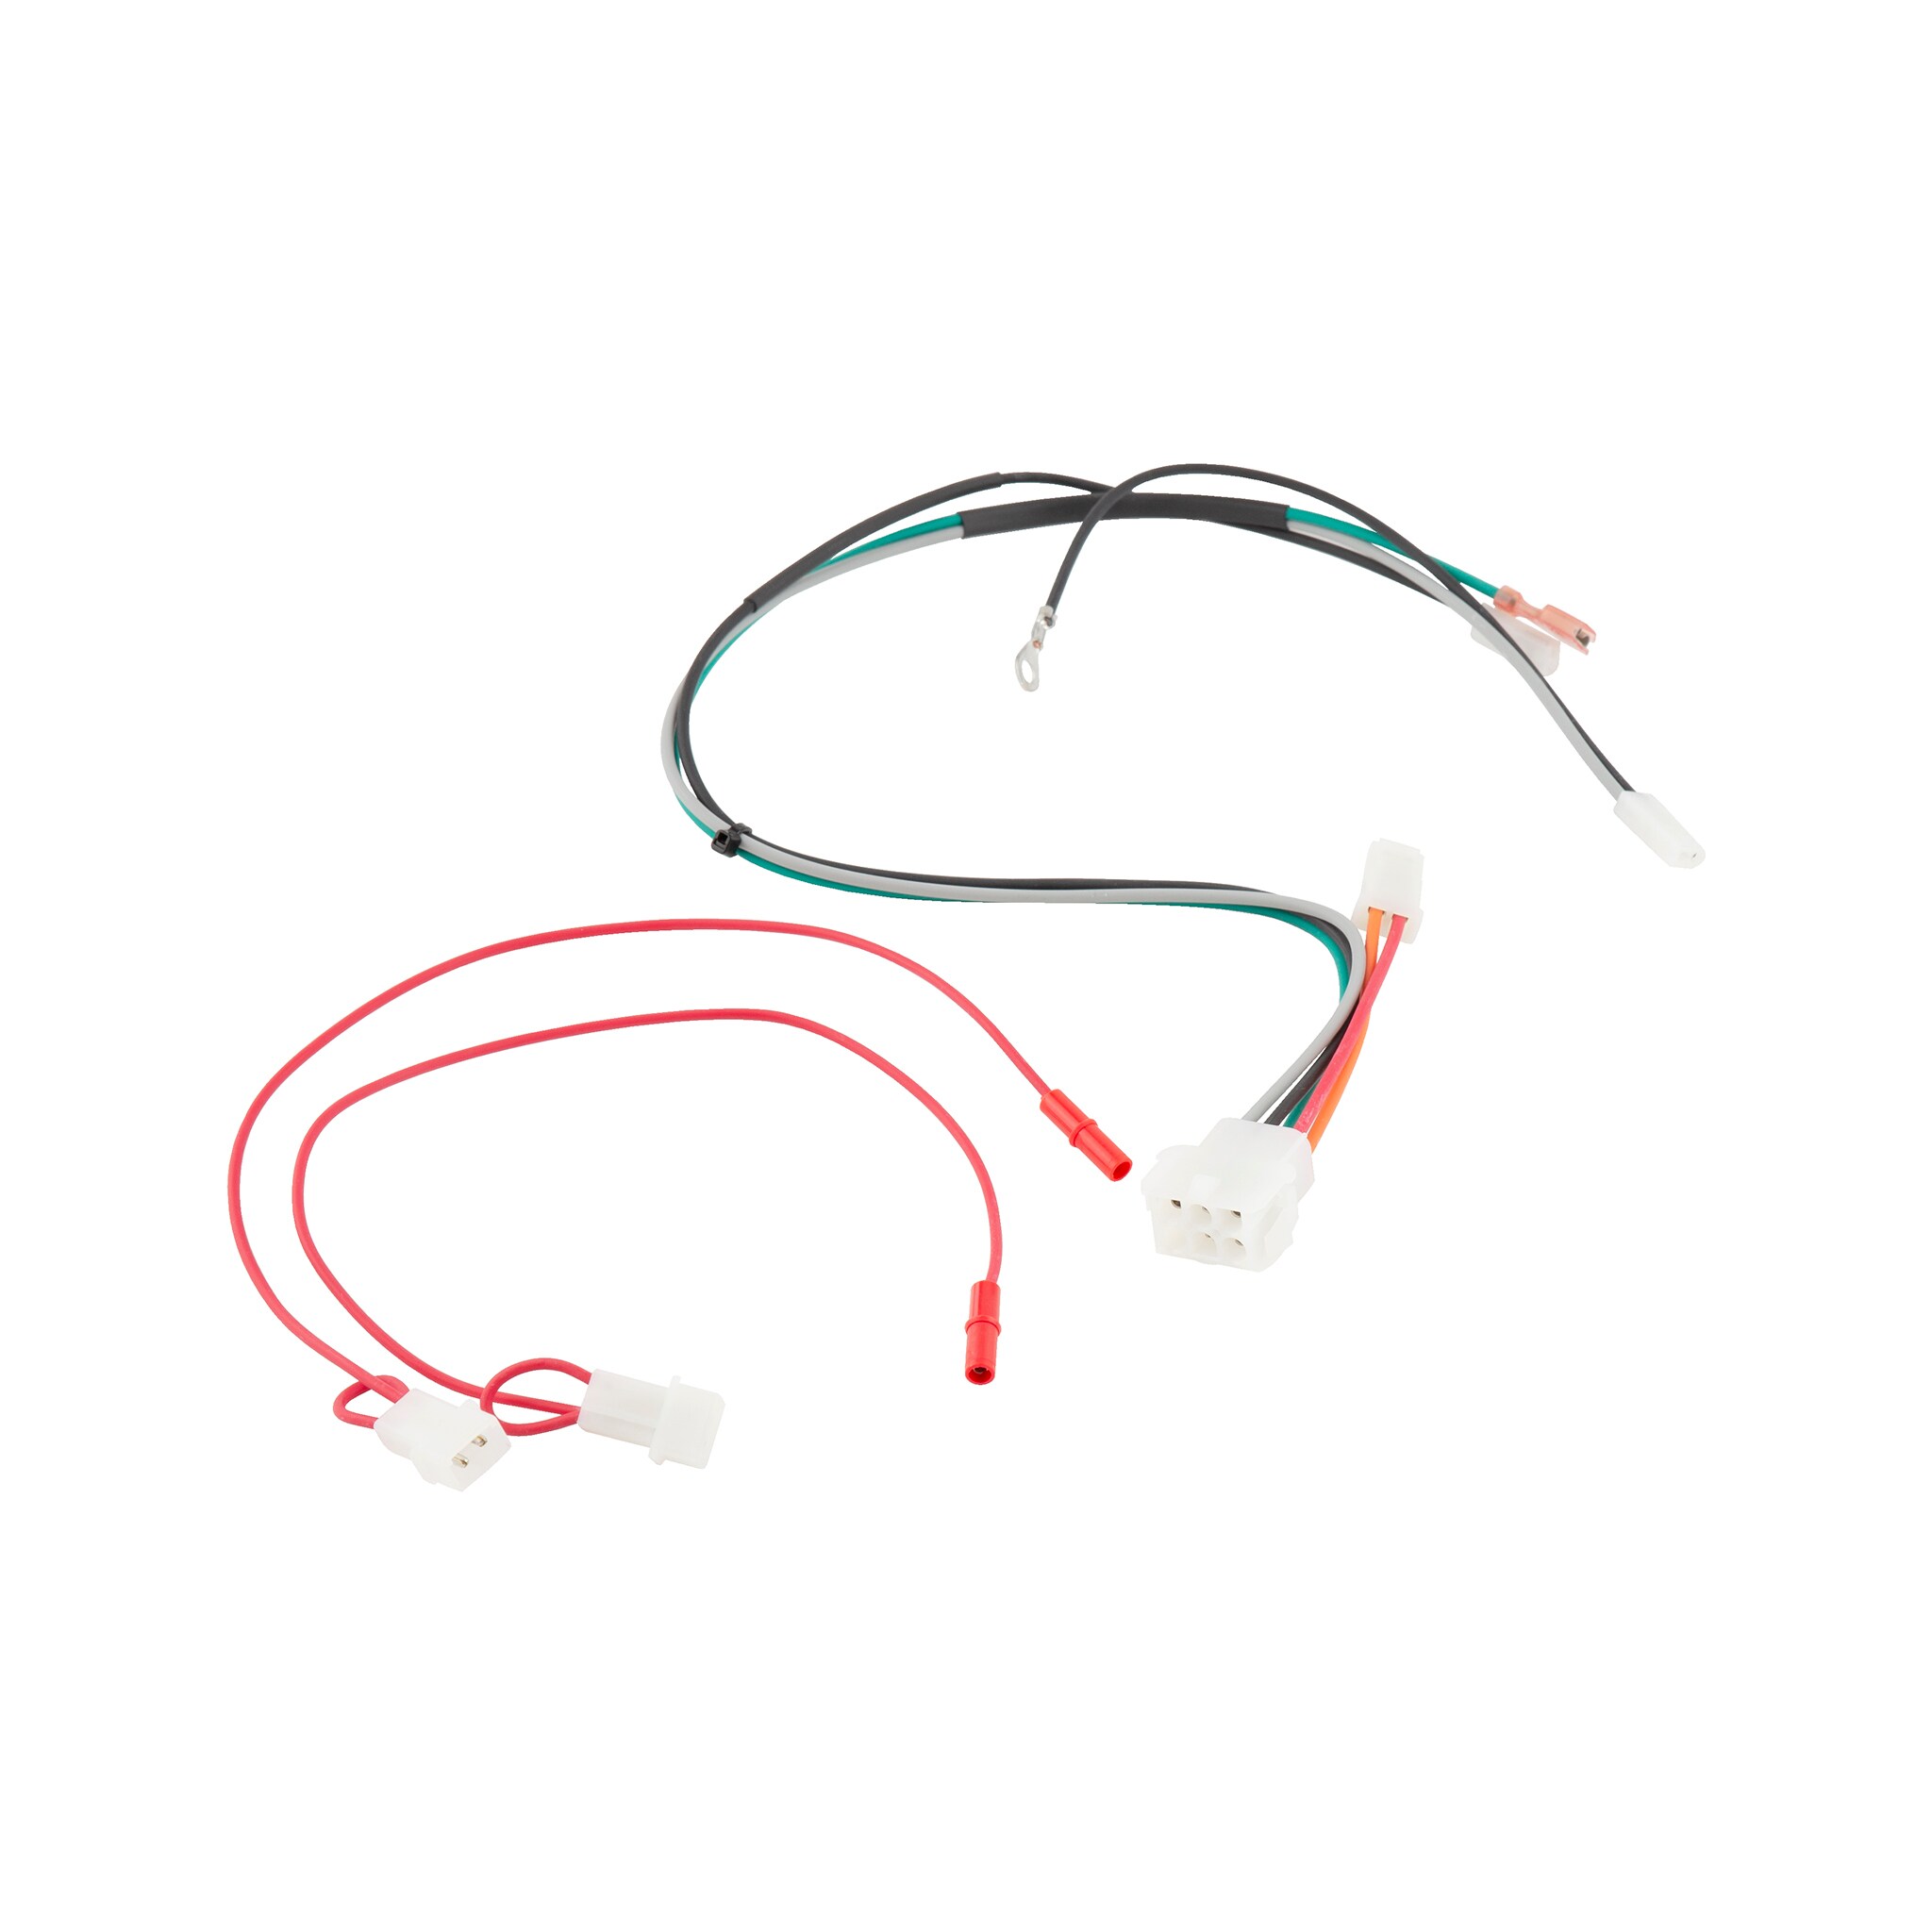 Briggs & Stratton 698330 Wiring Harness Replacement Part 